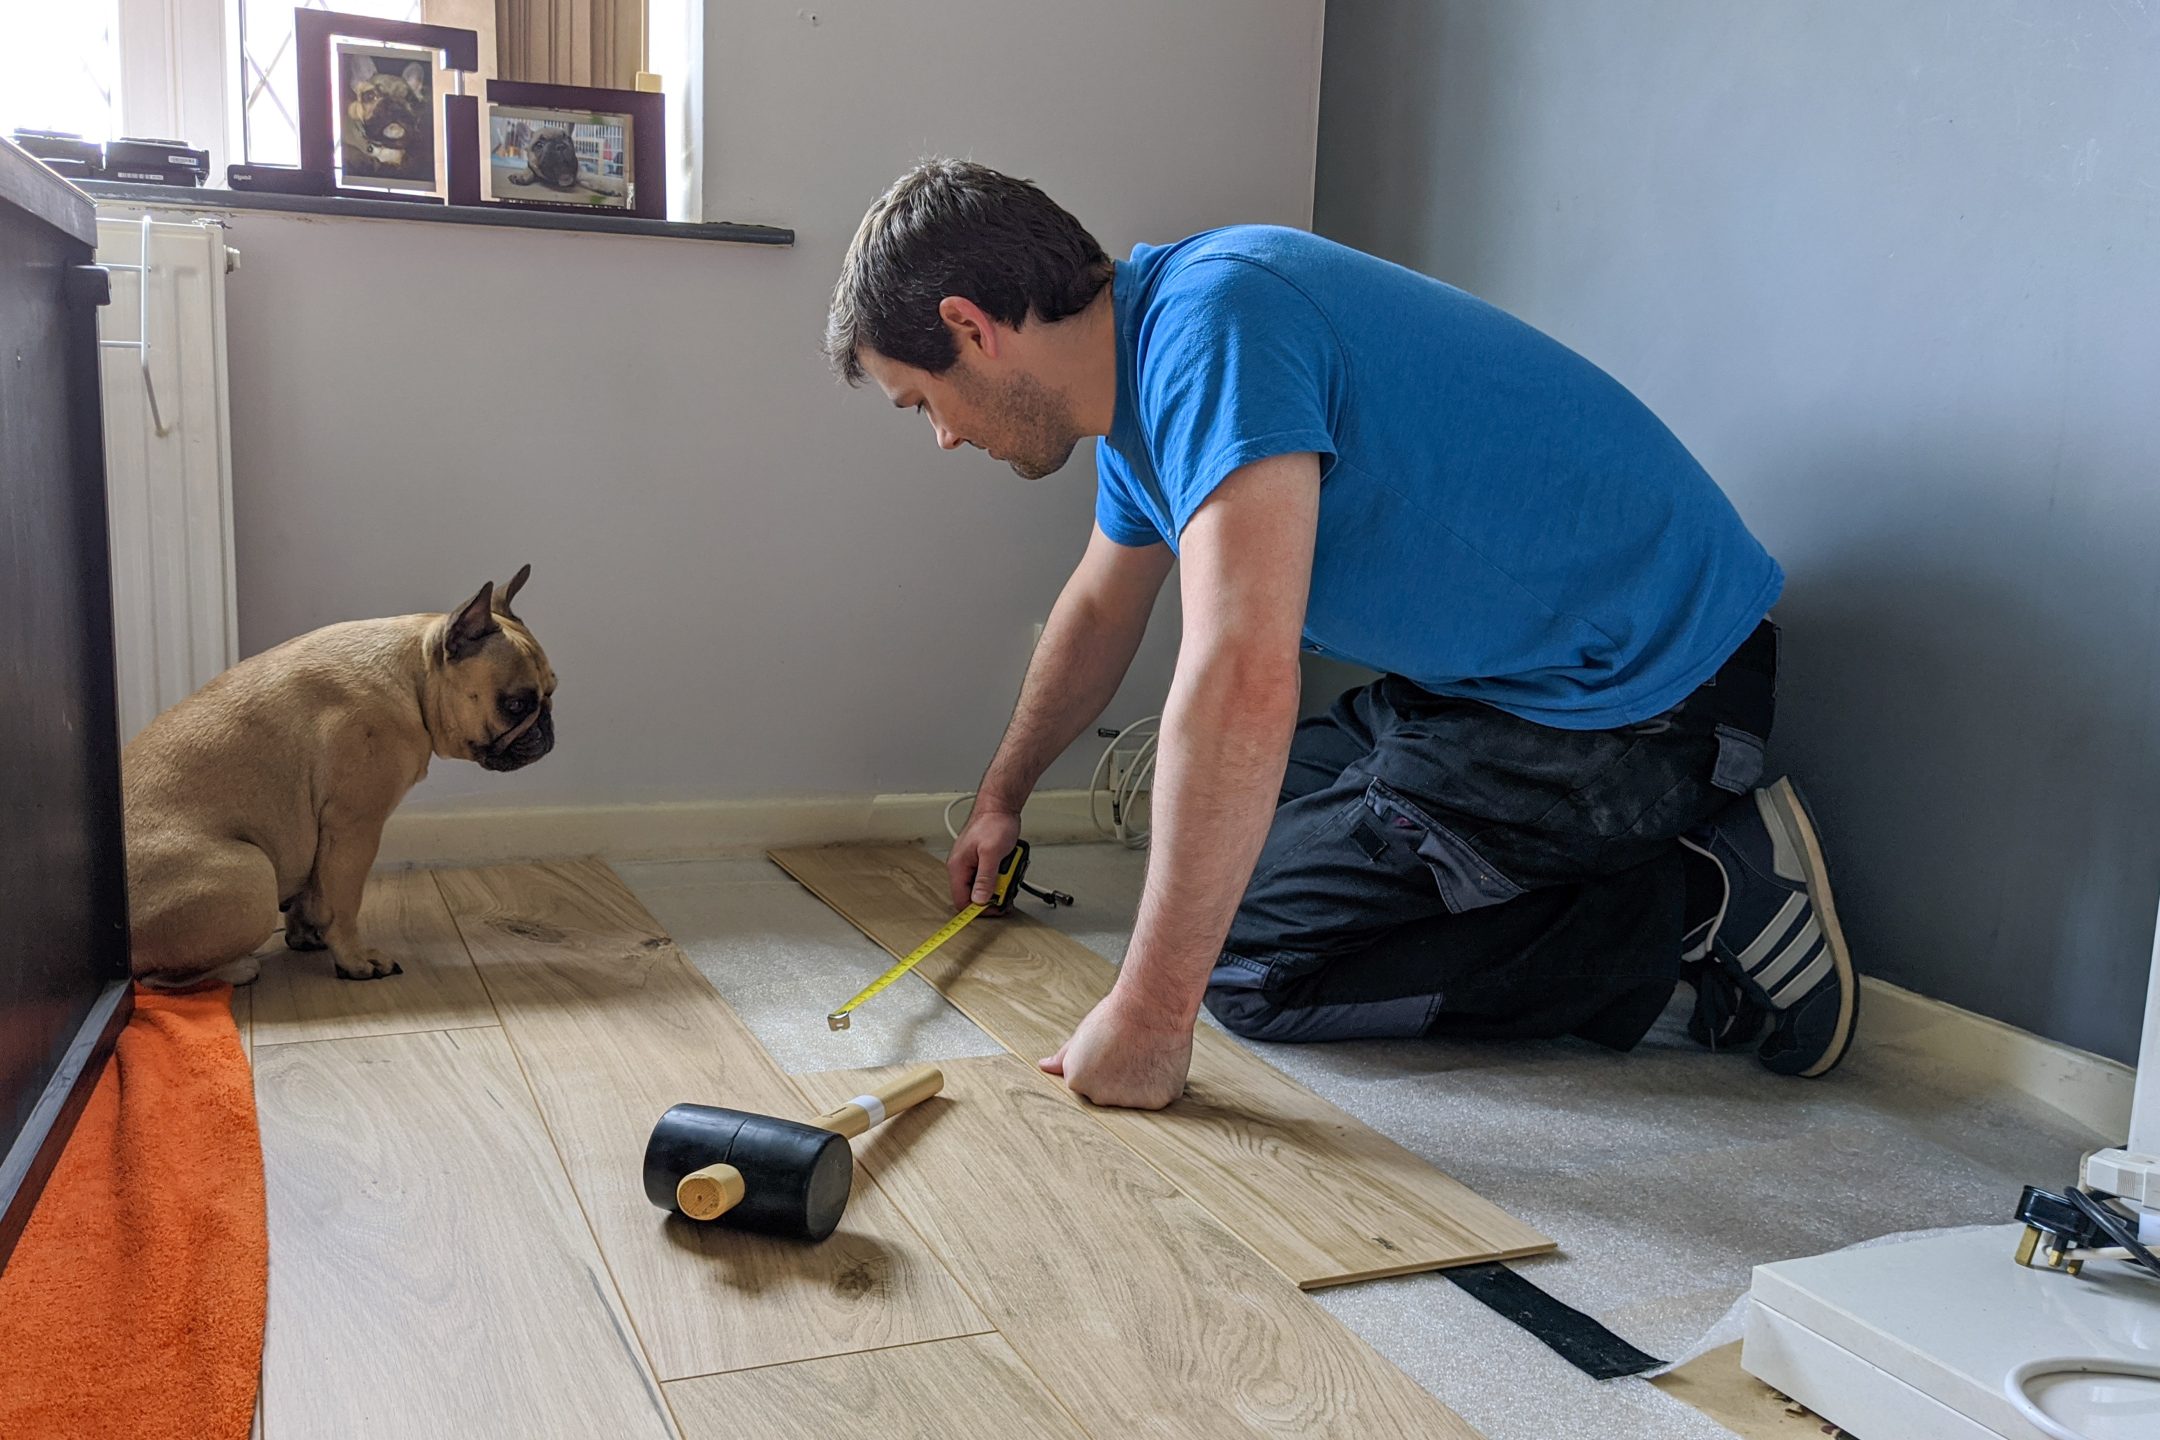 man working on a flooring project in his home with a dog watching